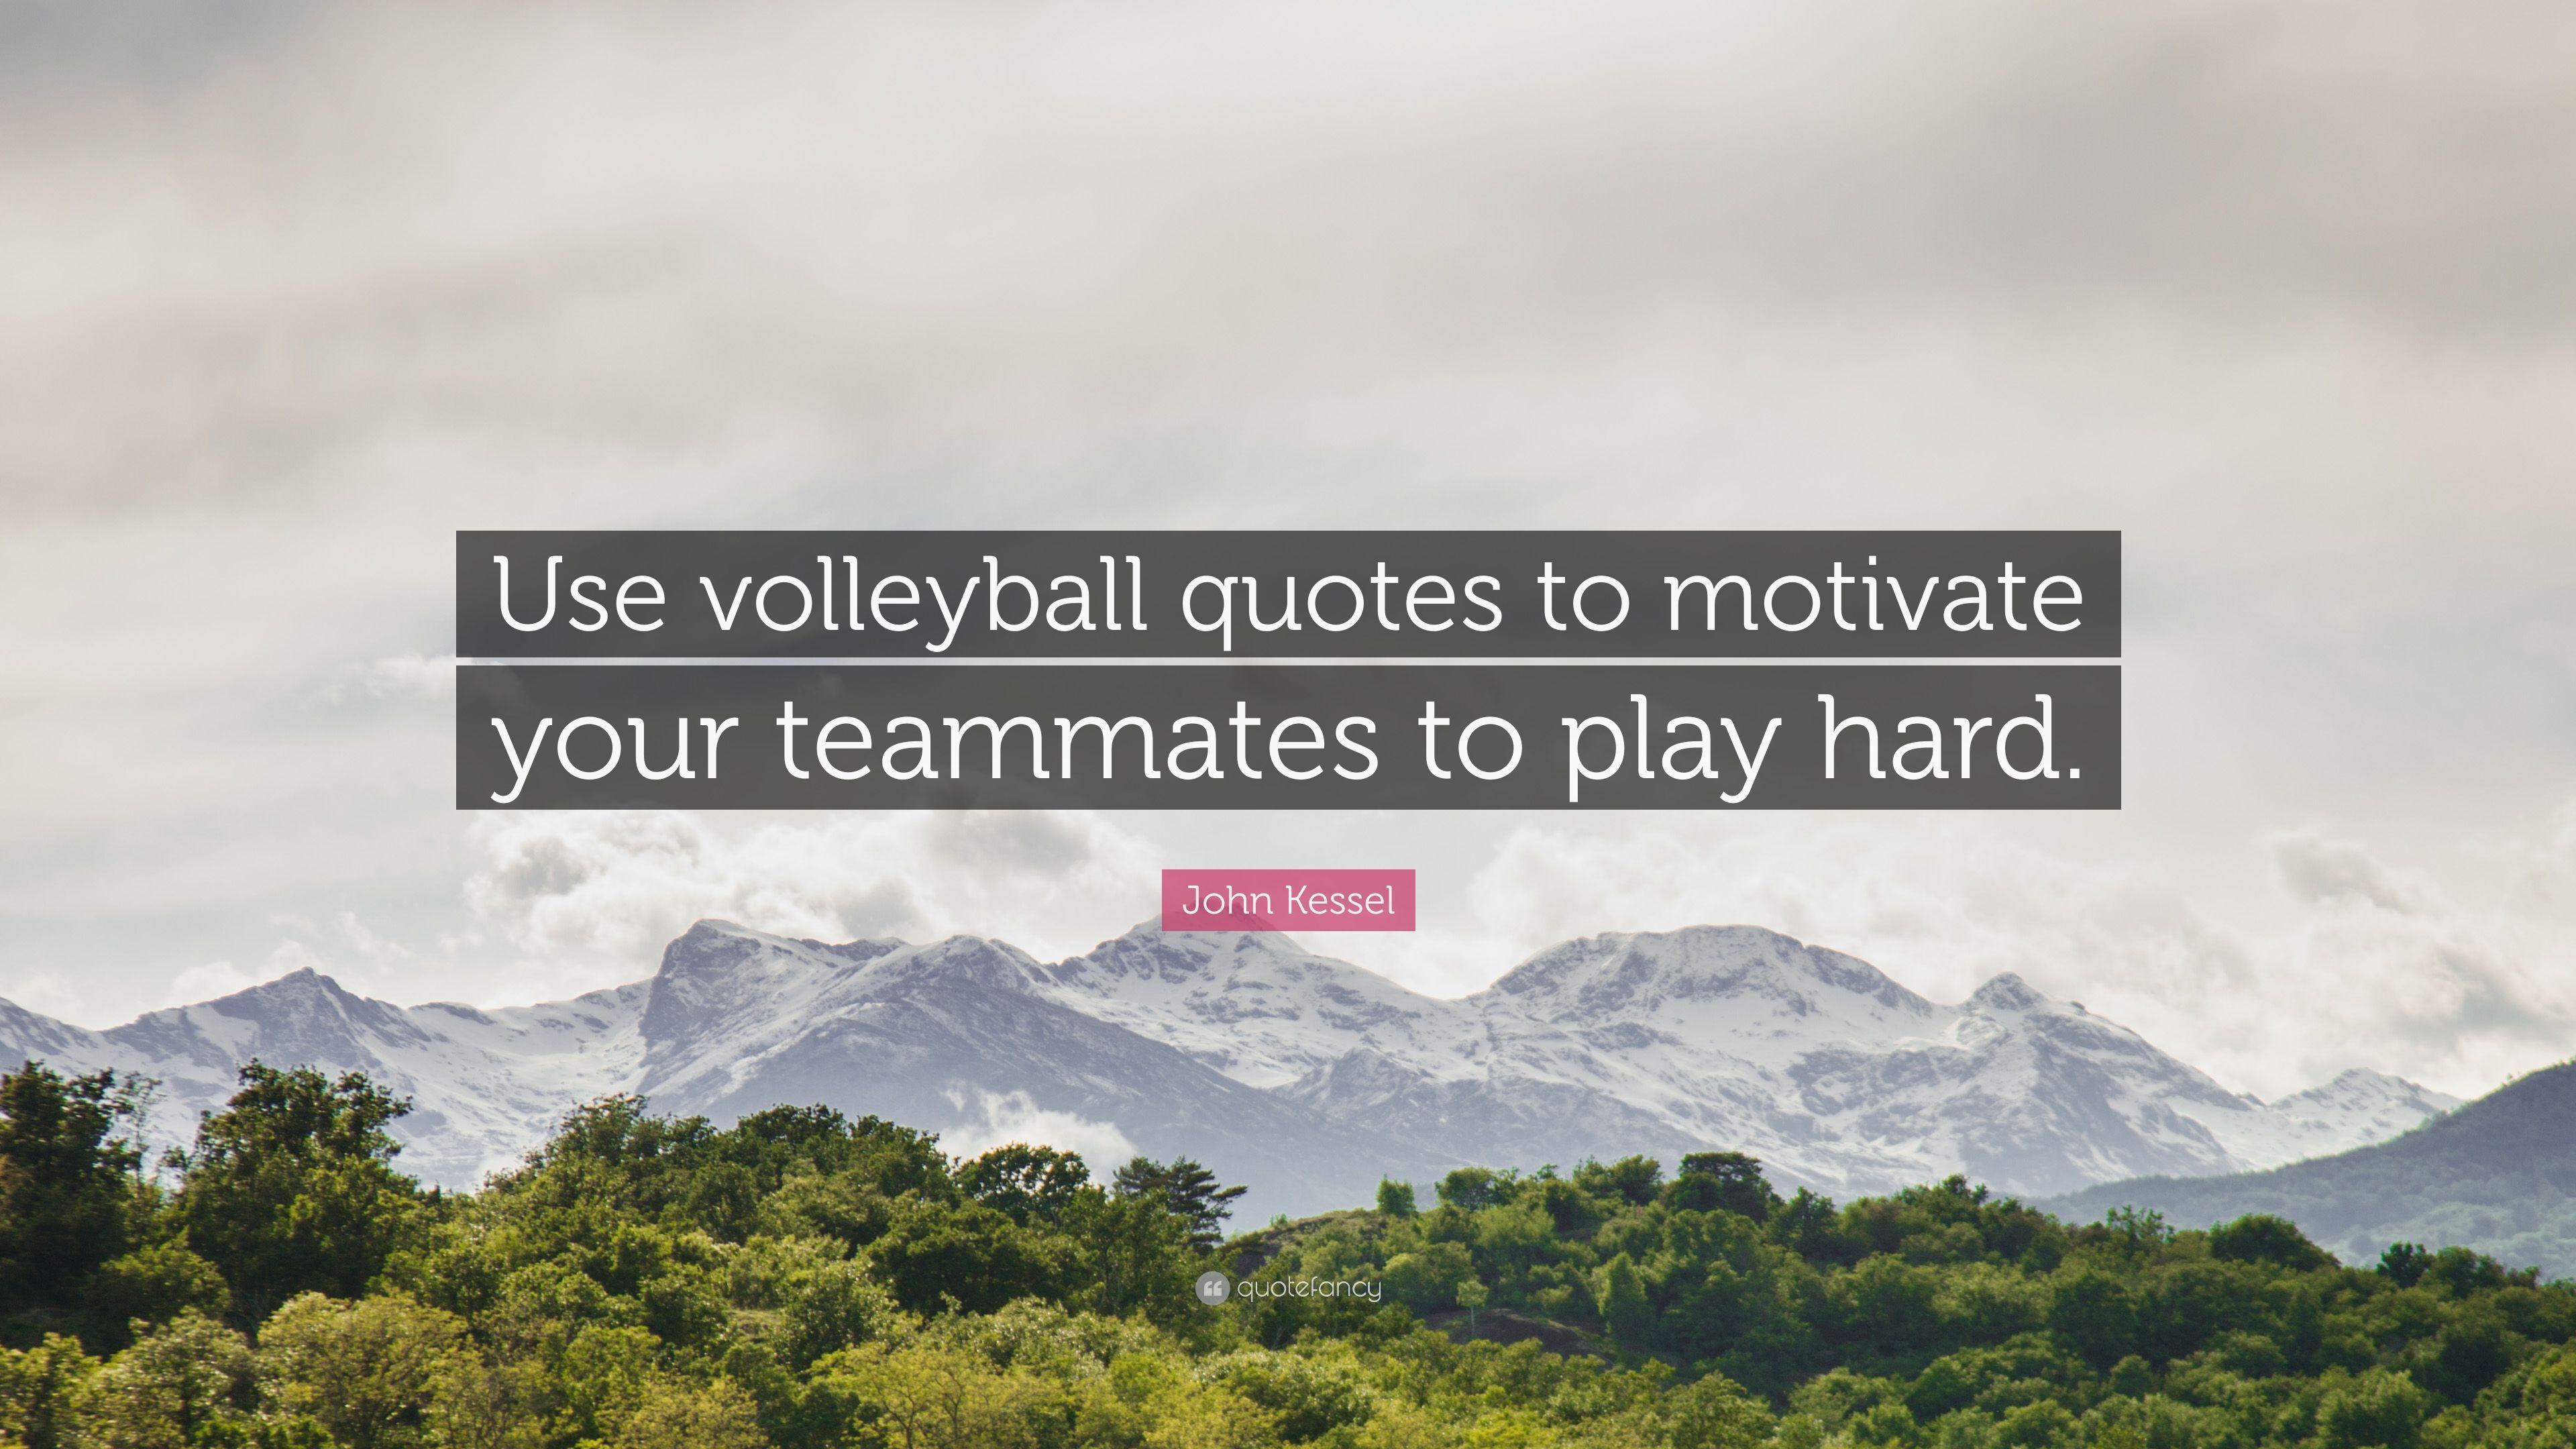 John Kessel Quote: “Use volleyball quotes to motivate your teammates